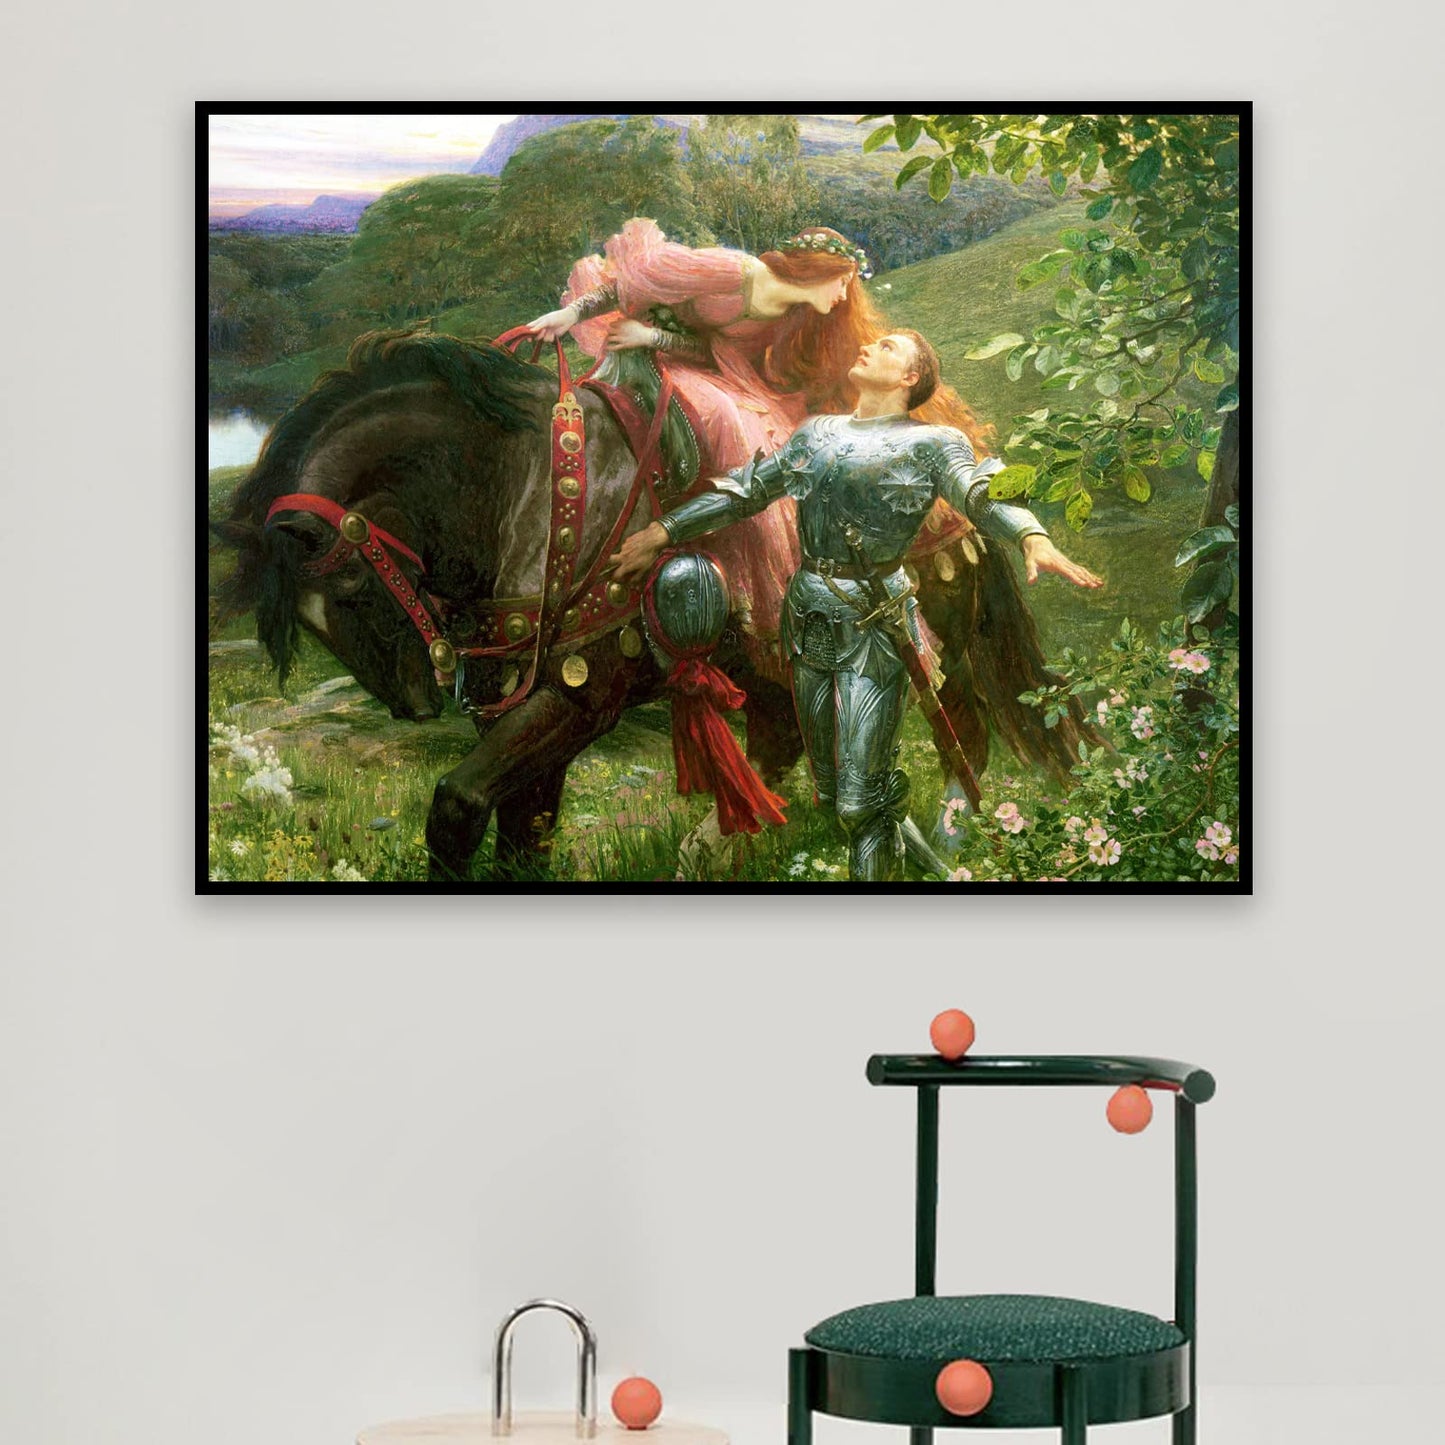 ZZPT La Belle Dame Sans Merci Poster - Frank Dicksee Prints - Famous Painting Reproduction - Modern Canvas Wall Art Pictures for Bedroom Living Room Home Decor Unframed (9x12in/23x30cm)